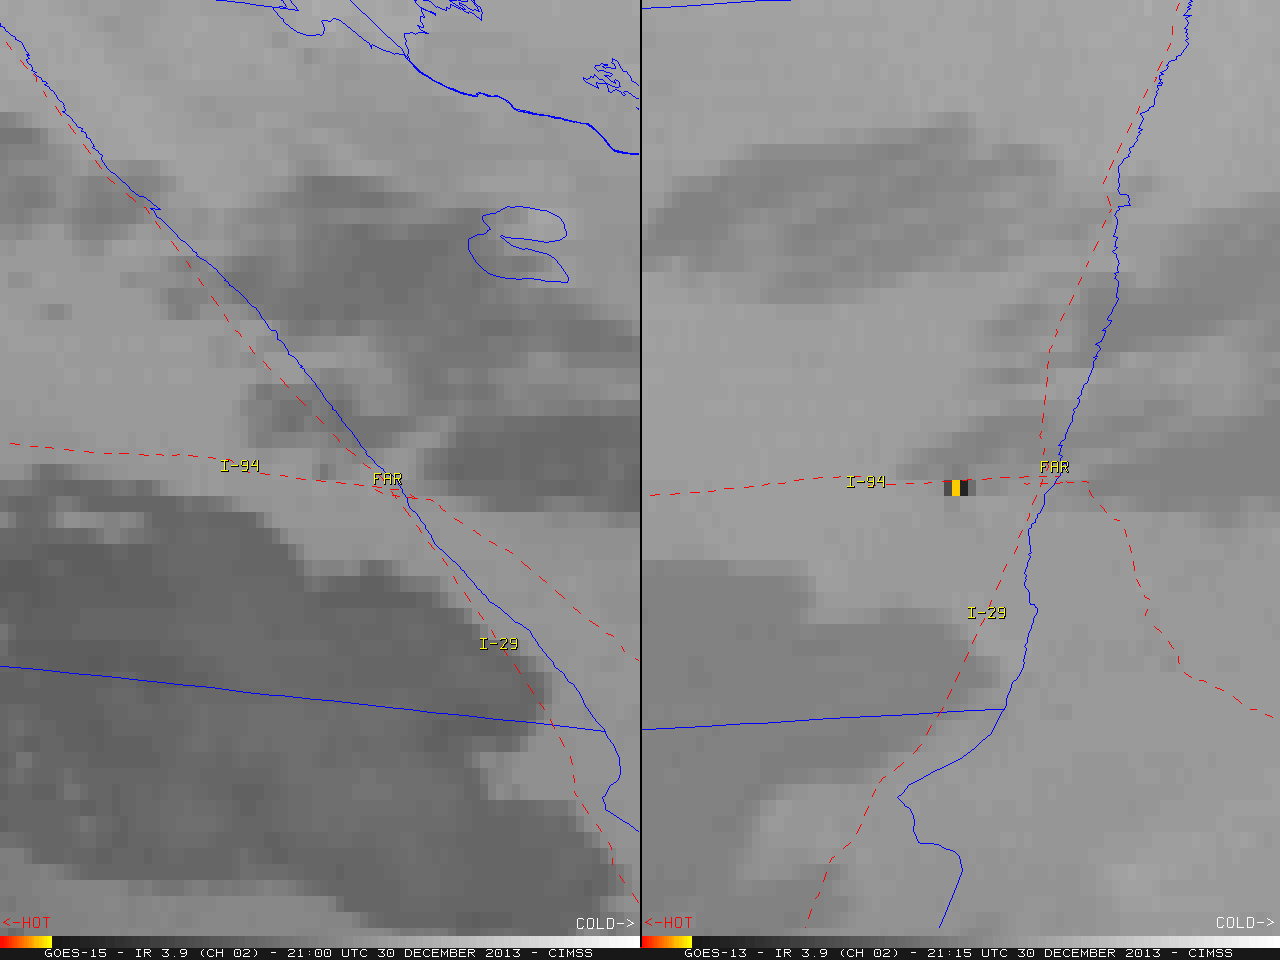 GOES-15 (left) and GOES-13 (right) 3.9 µm shortwave IR images [click to play animation]